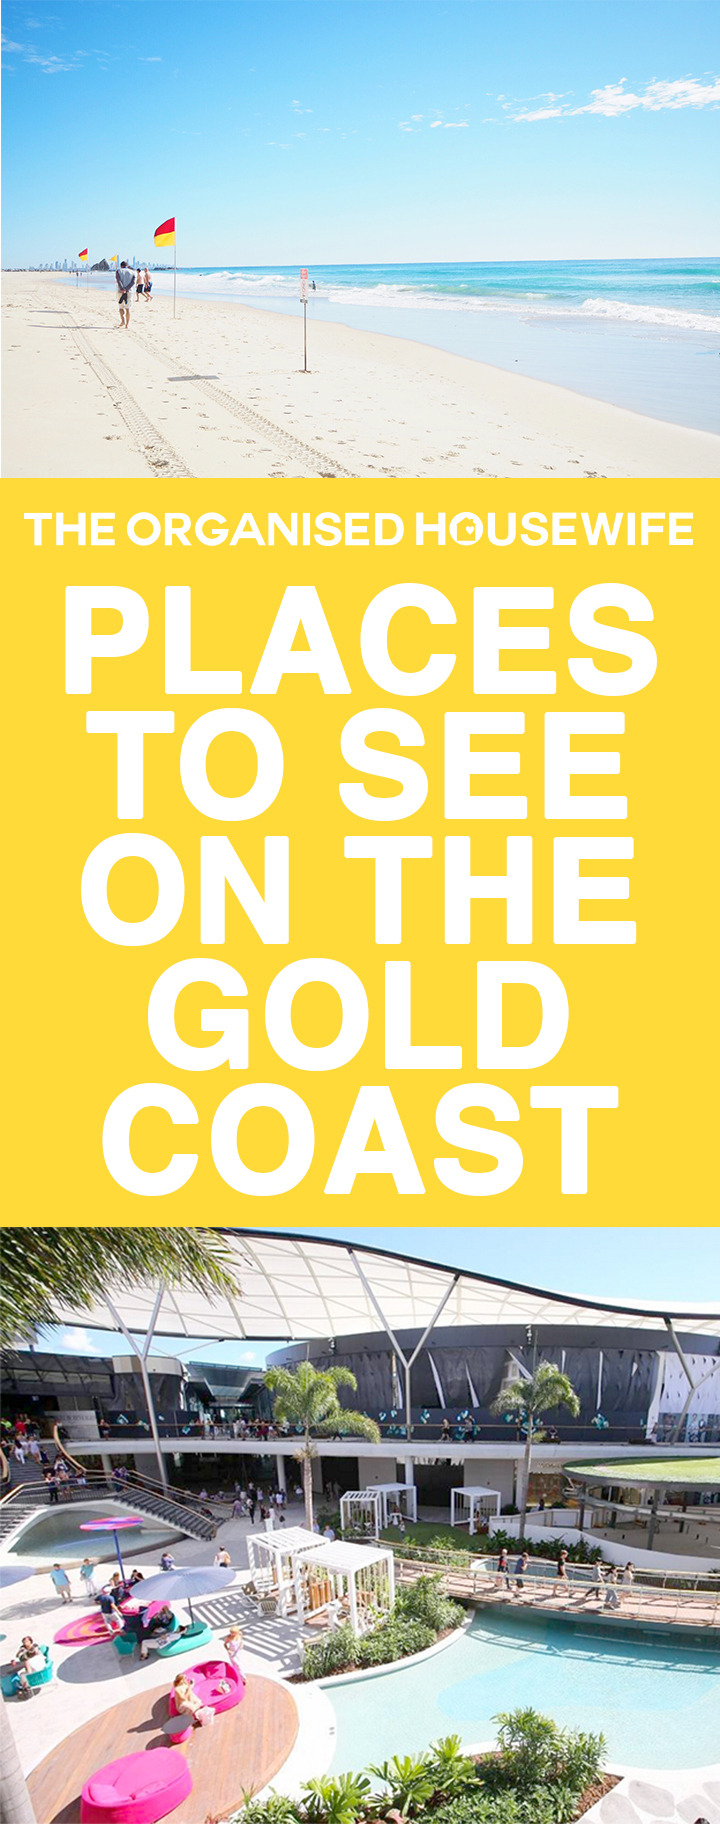 The Gold Coast really is paradise from beaches in the east to mountains in the west no matter which way you go you're guaranteed an enjoyable day out. If you're thinking of travelling the Gold Coast, try to visit some of these destinations.